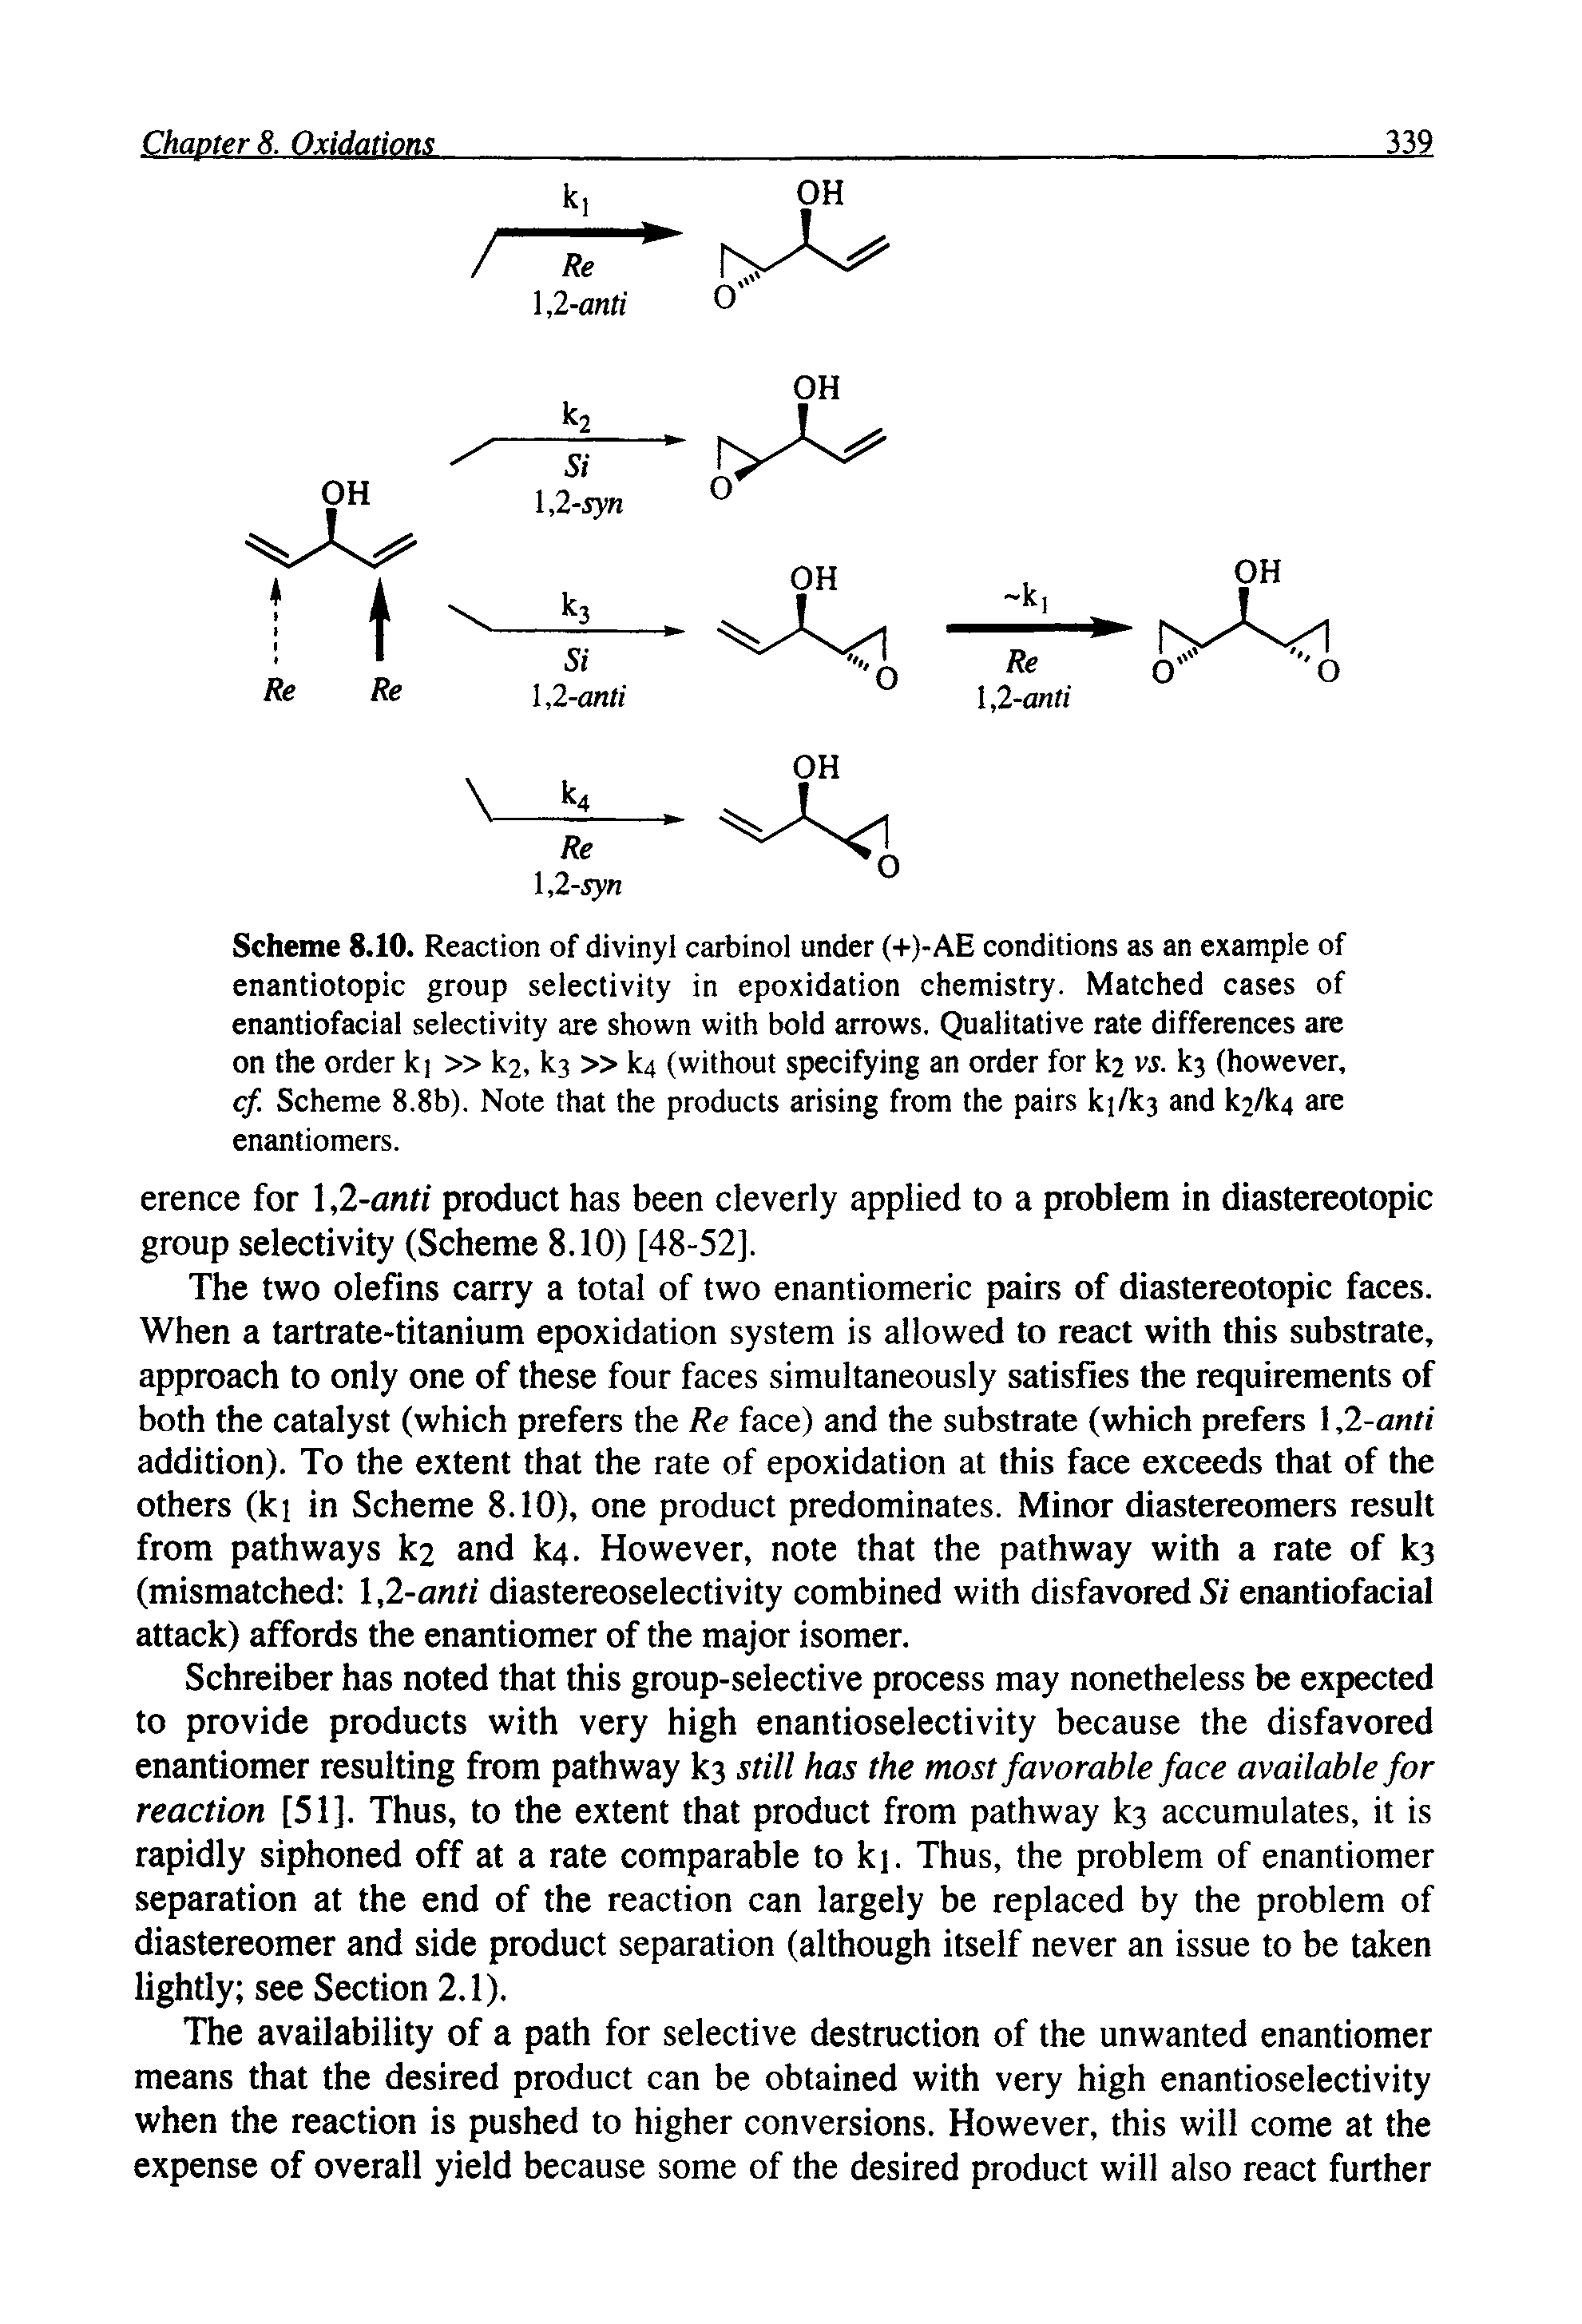 Scheme 8.10. Reaction of divinyl carbinol under (+)-AE conditions as an example of enantiotopic group selectivity in epoxidation chemistry. Matched cases of enantiofacial selectivity are shown with bold arrows. Qualitative rate differences are on the order kj k2, ks k4 (without specifying an order for k2 vi. k3 (however, cf. Scheme 8.8b). Note that the products arising from the pairs ki/k3 and k2/k4 are enantiomers.